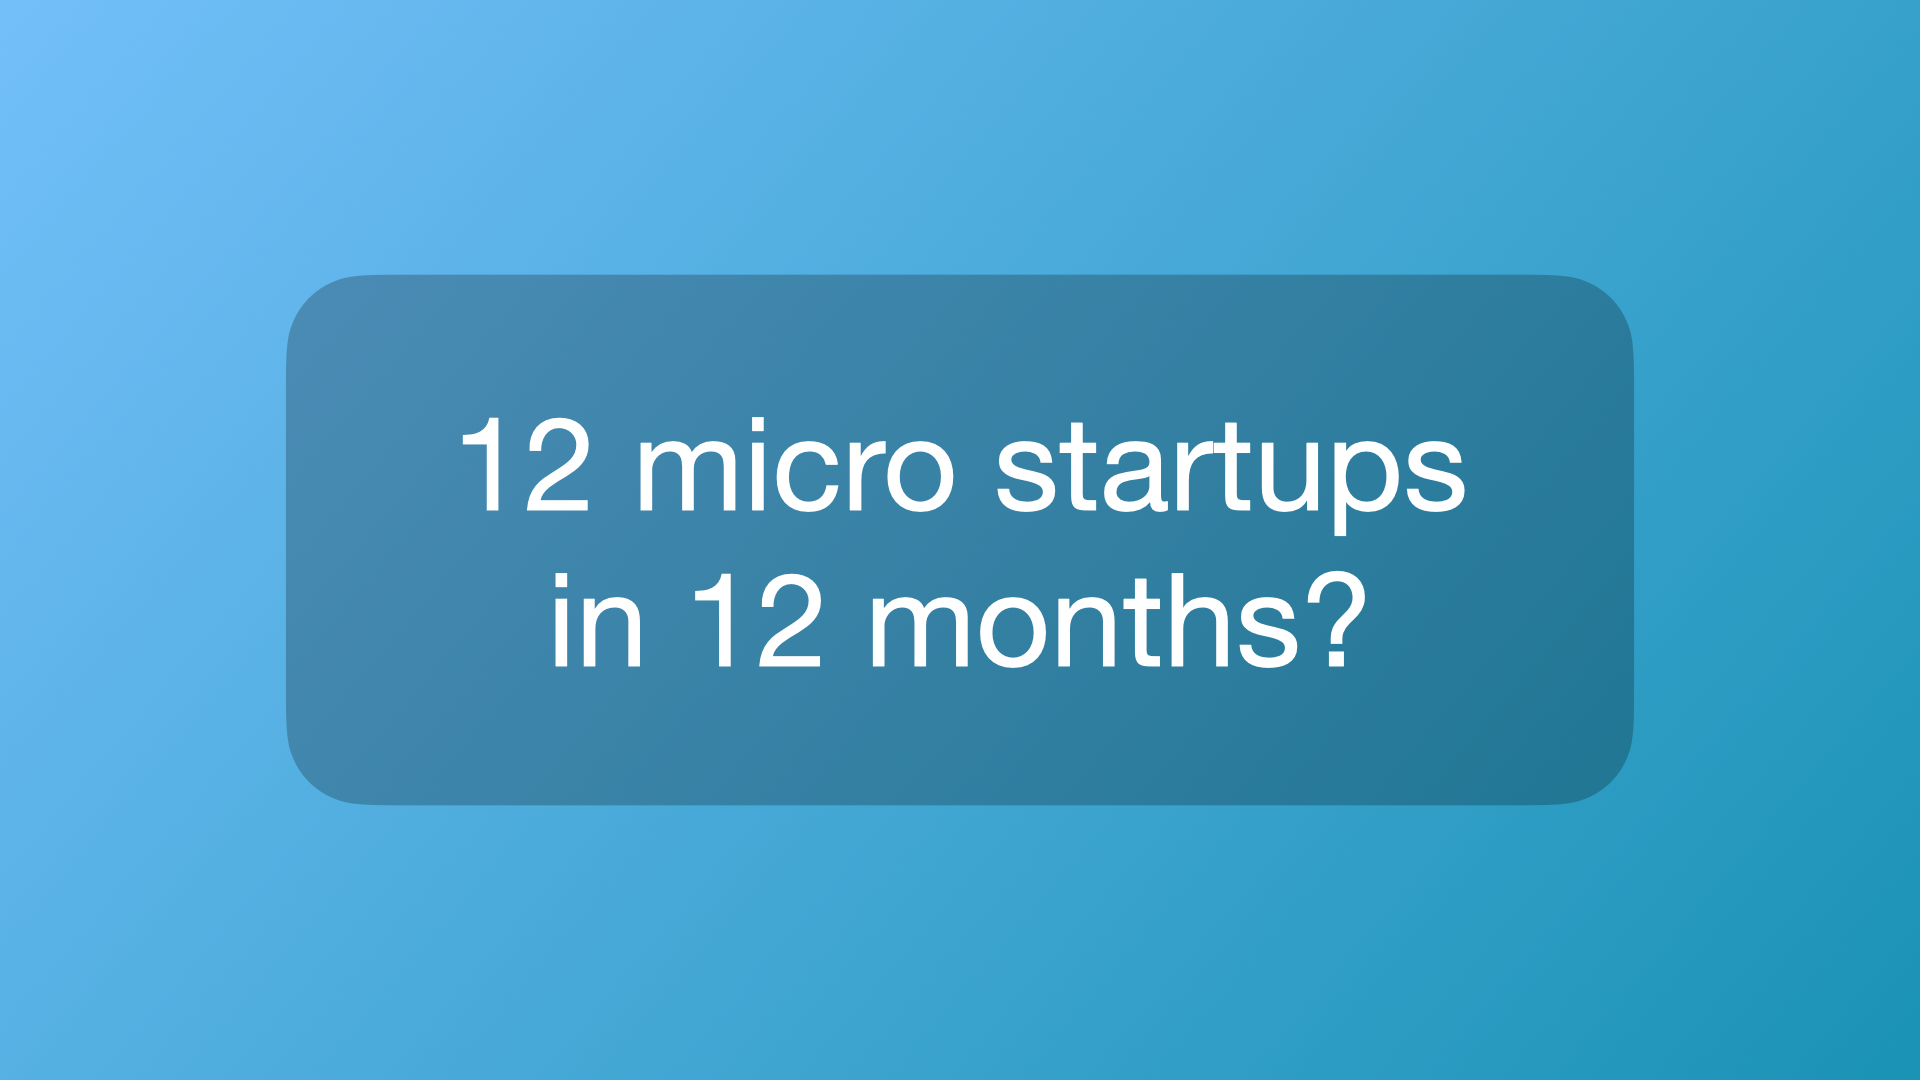 12 micro startups in 12 months?